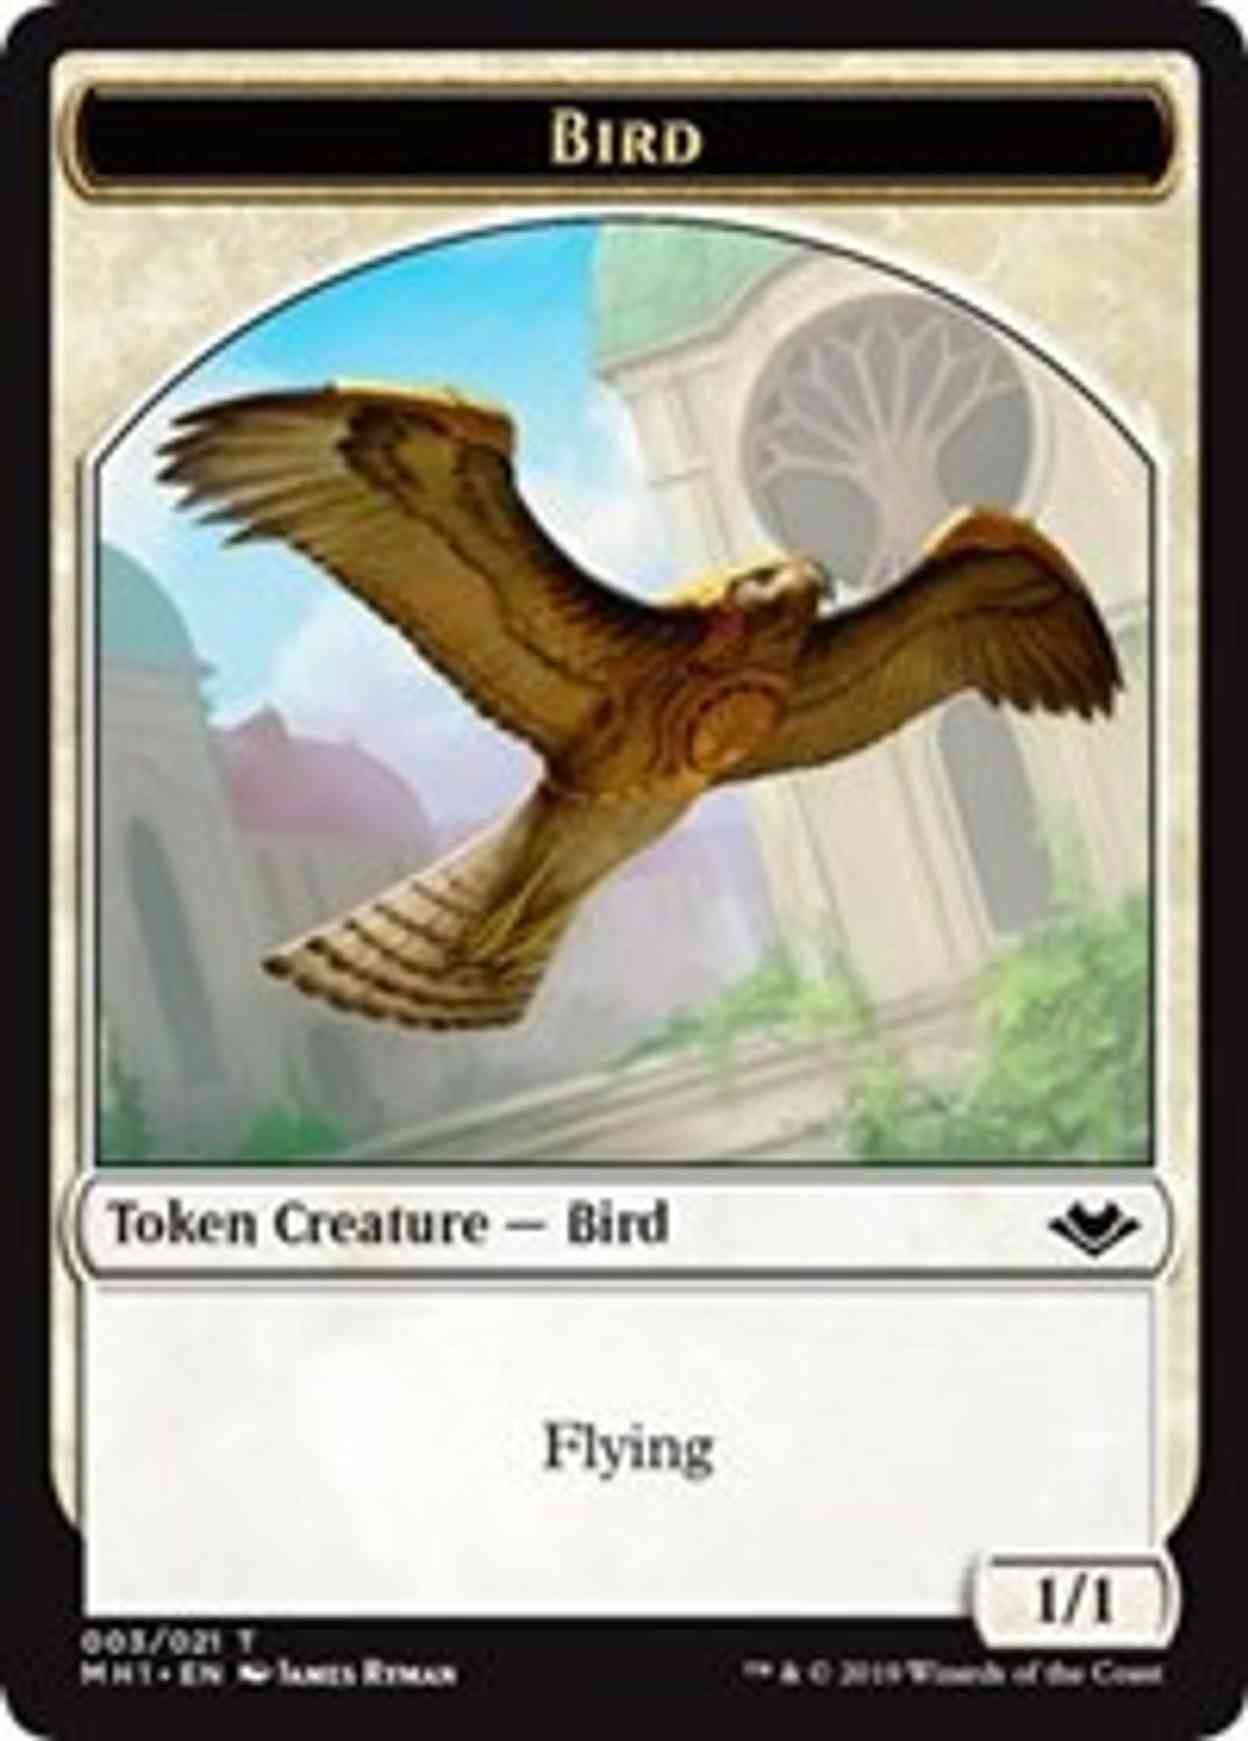 Bird (003) // Construct (017) Double-sided Token magic card front